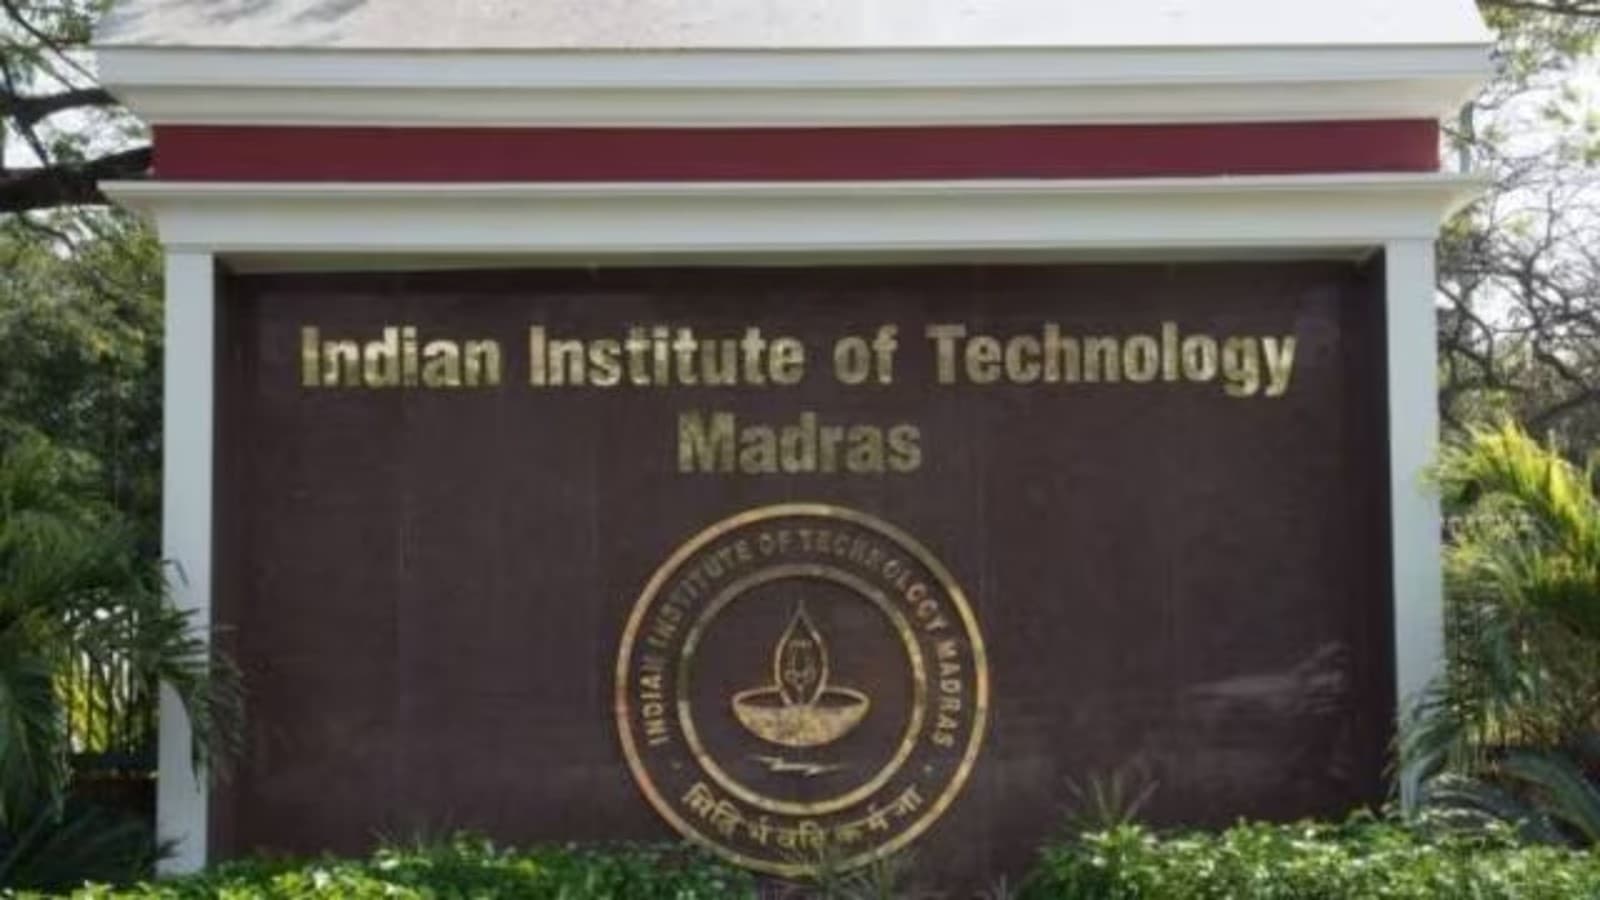 IIT Madras raises All-Time High of Rs. 513 Crore from Alumni, Corporates and Donors